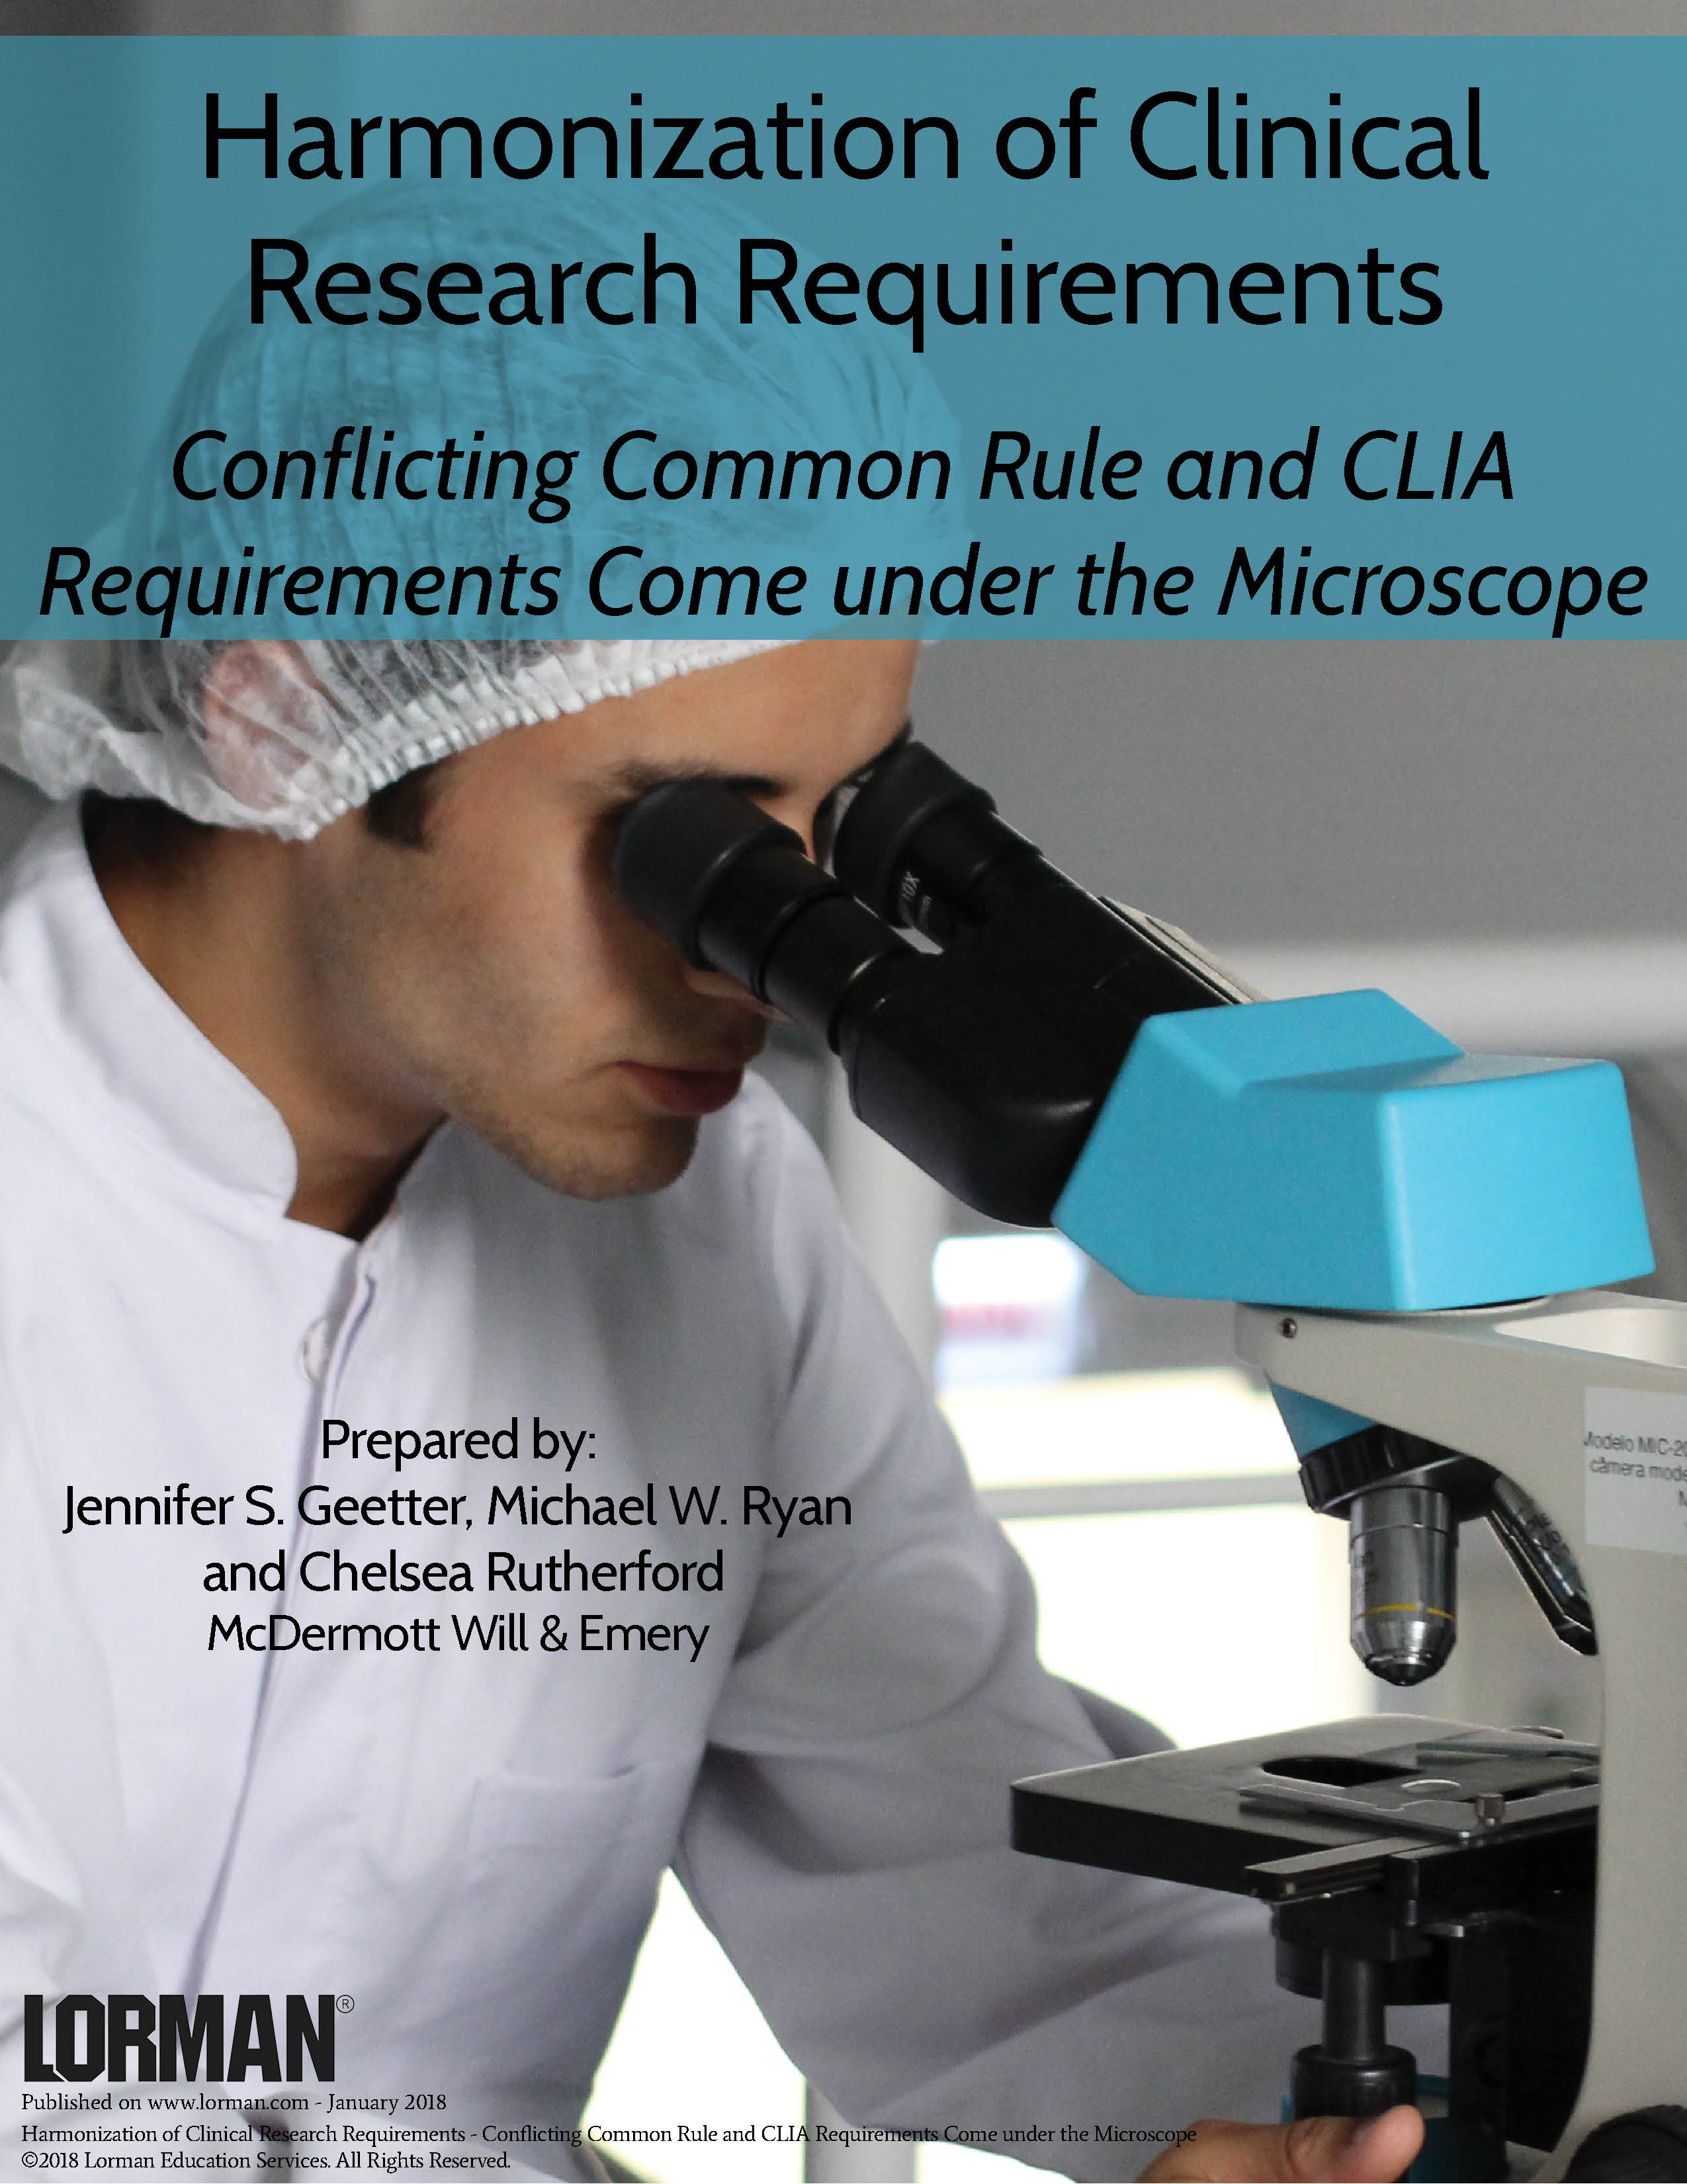 Harmonization of Clinical Research Requirements